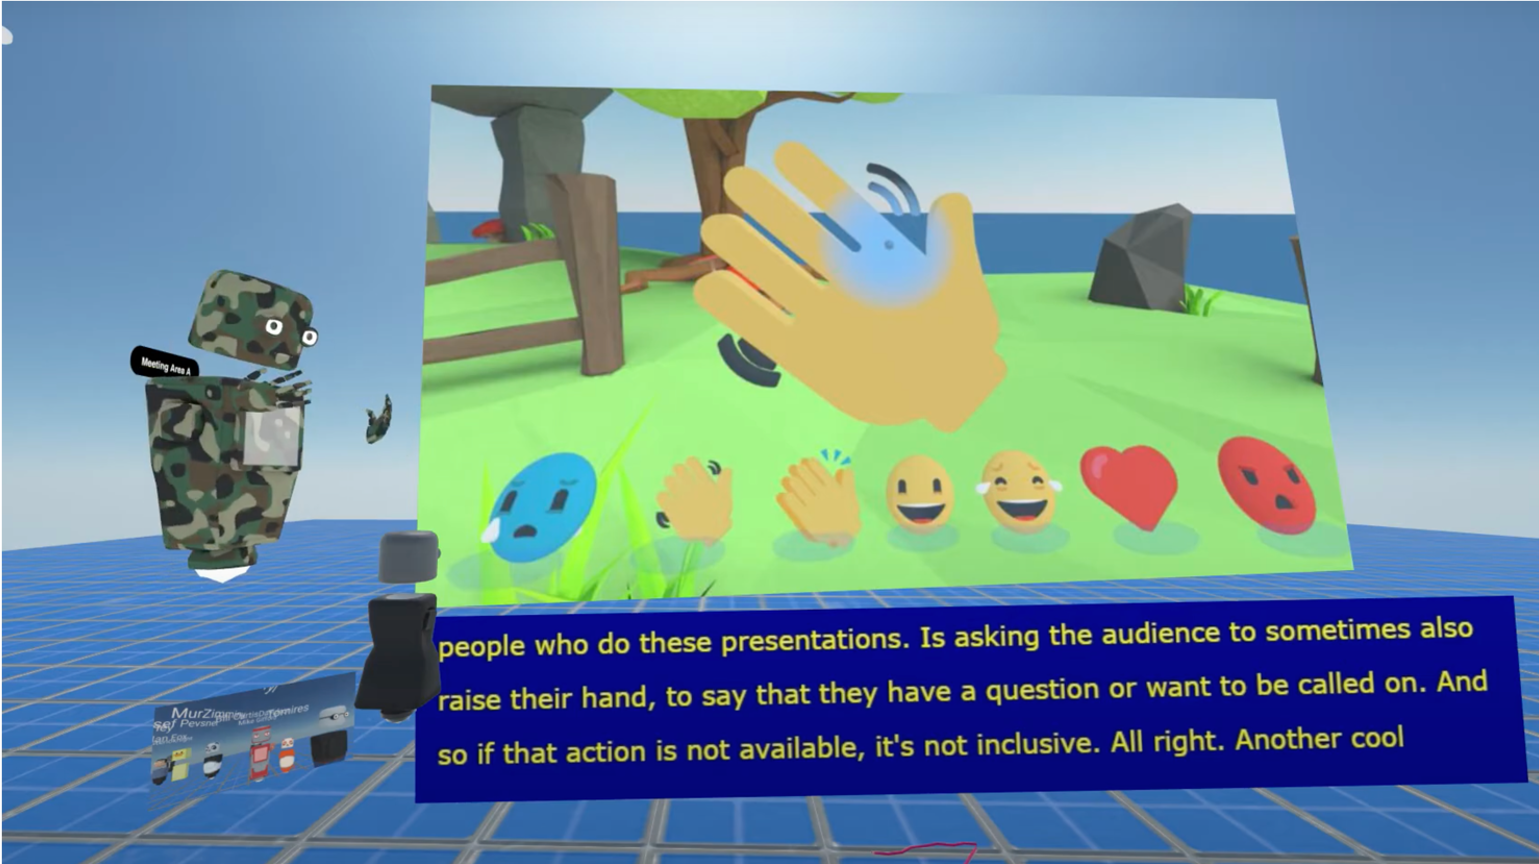 Thomas Logan's avatar stands next to presentation screen with StreamText captions displayed